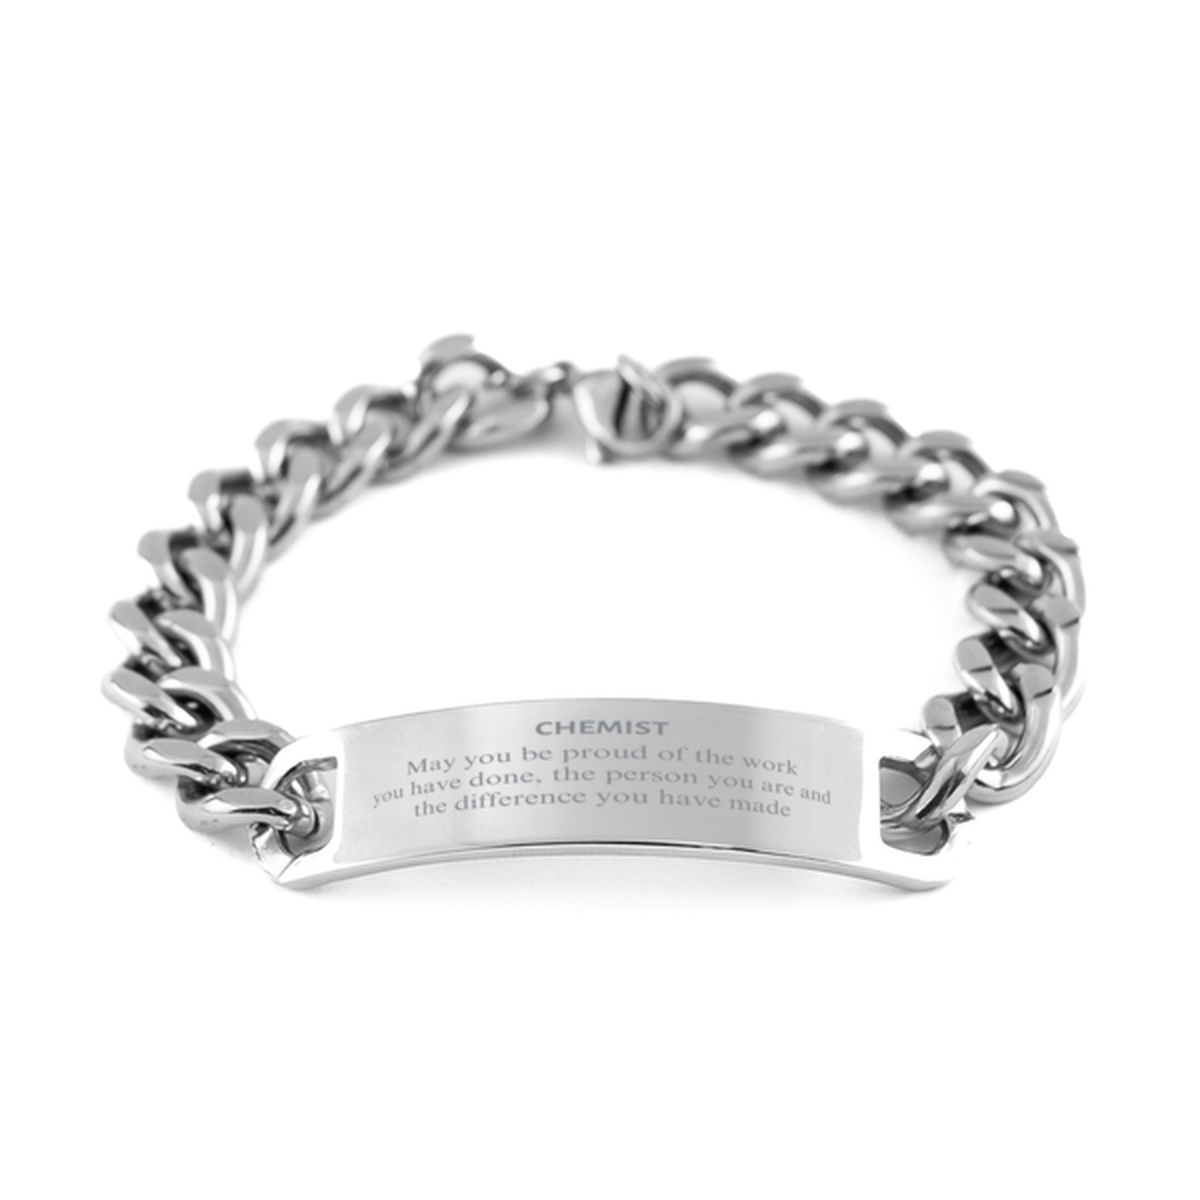 Chemist May you be proud of the work you have done, Retirement Chemist Cuban Chain Stainless Steel Bracelet for Colleague Appreciation Gifts Amazing for Chemist